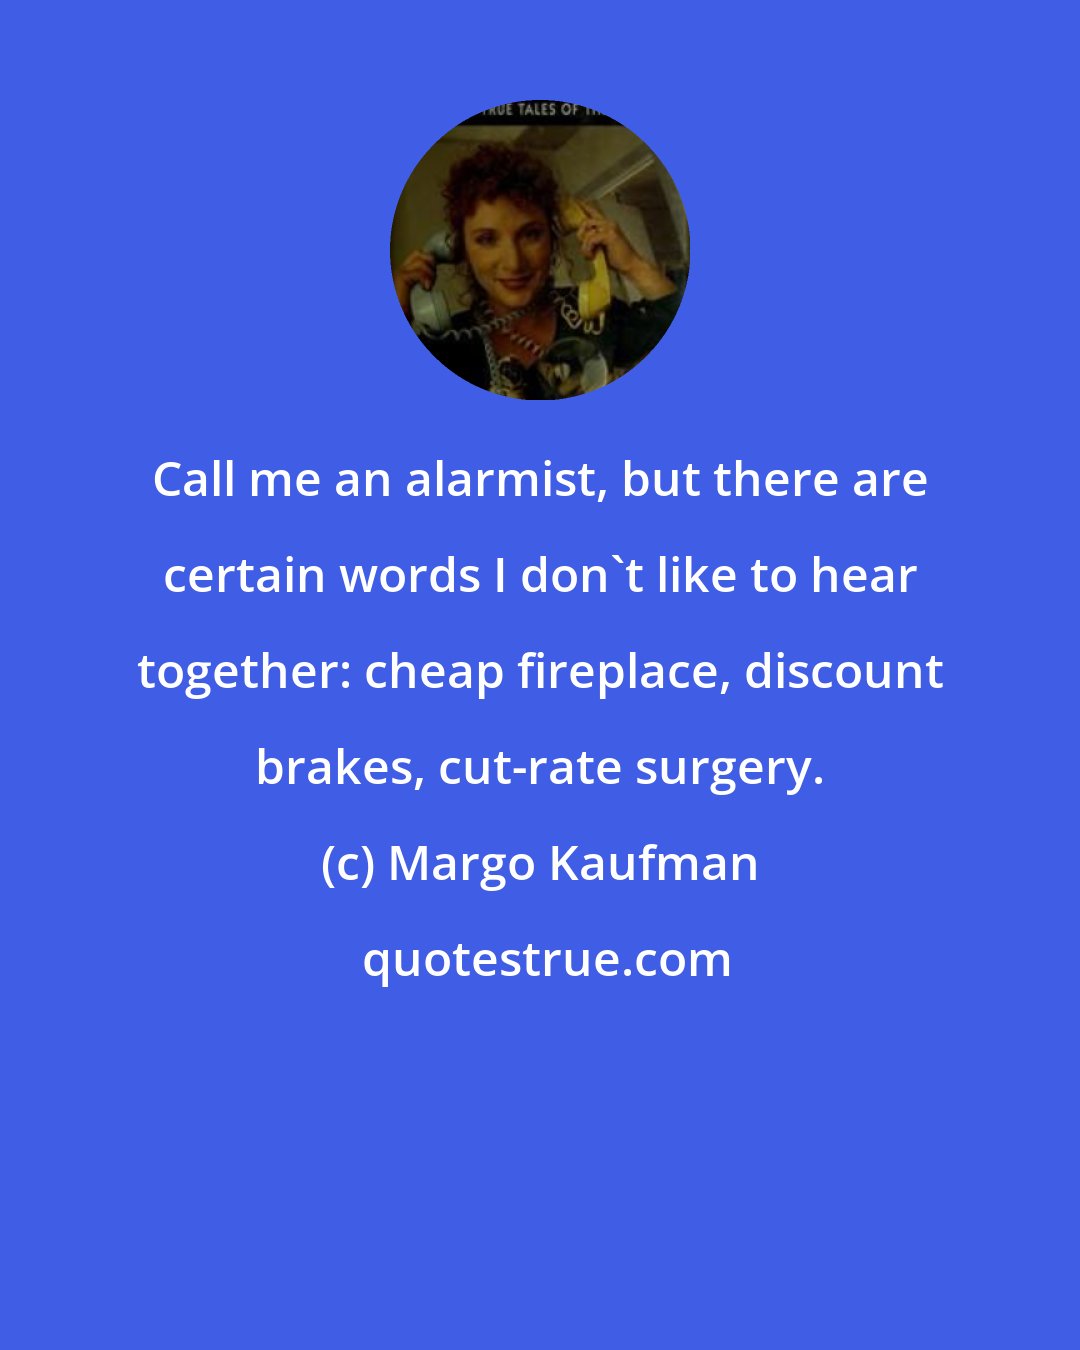 Margo Kaufman: Call me an alarmist, but there are certain words I don't like to hear together: cheap fireplace, discount brakes, cut-rate surgery.